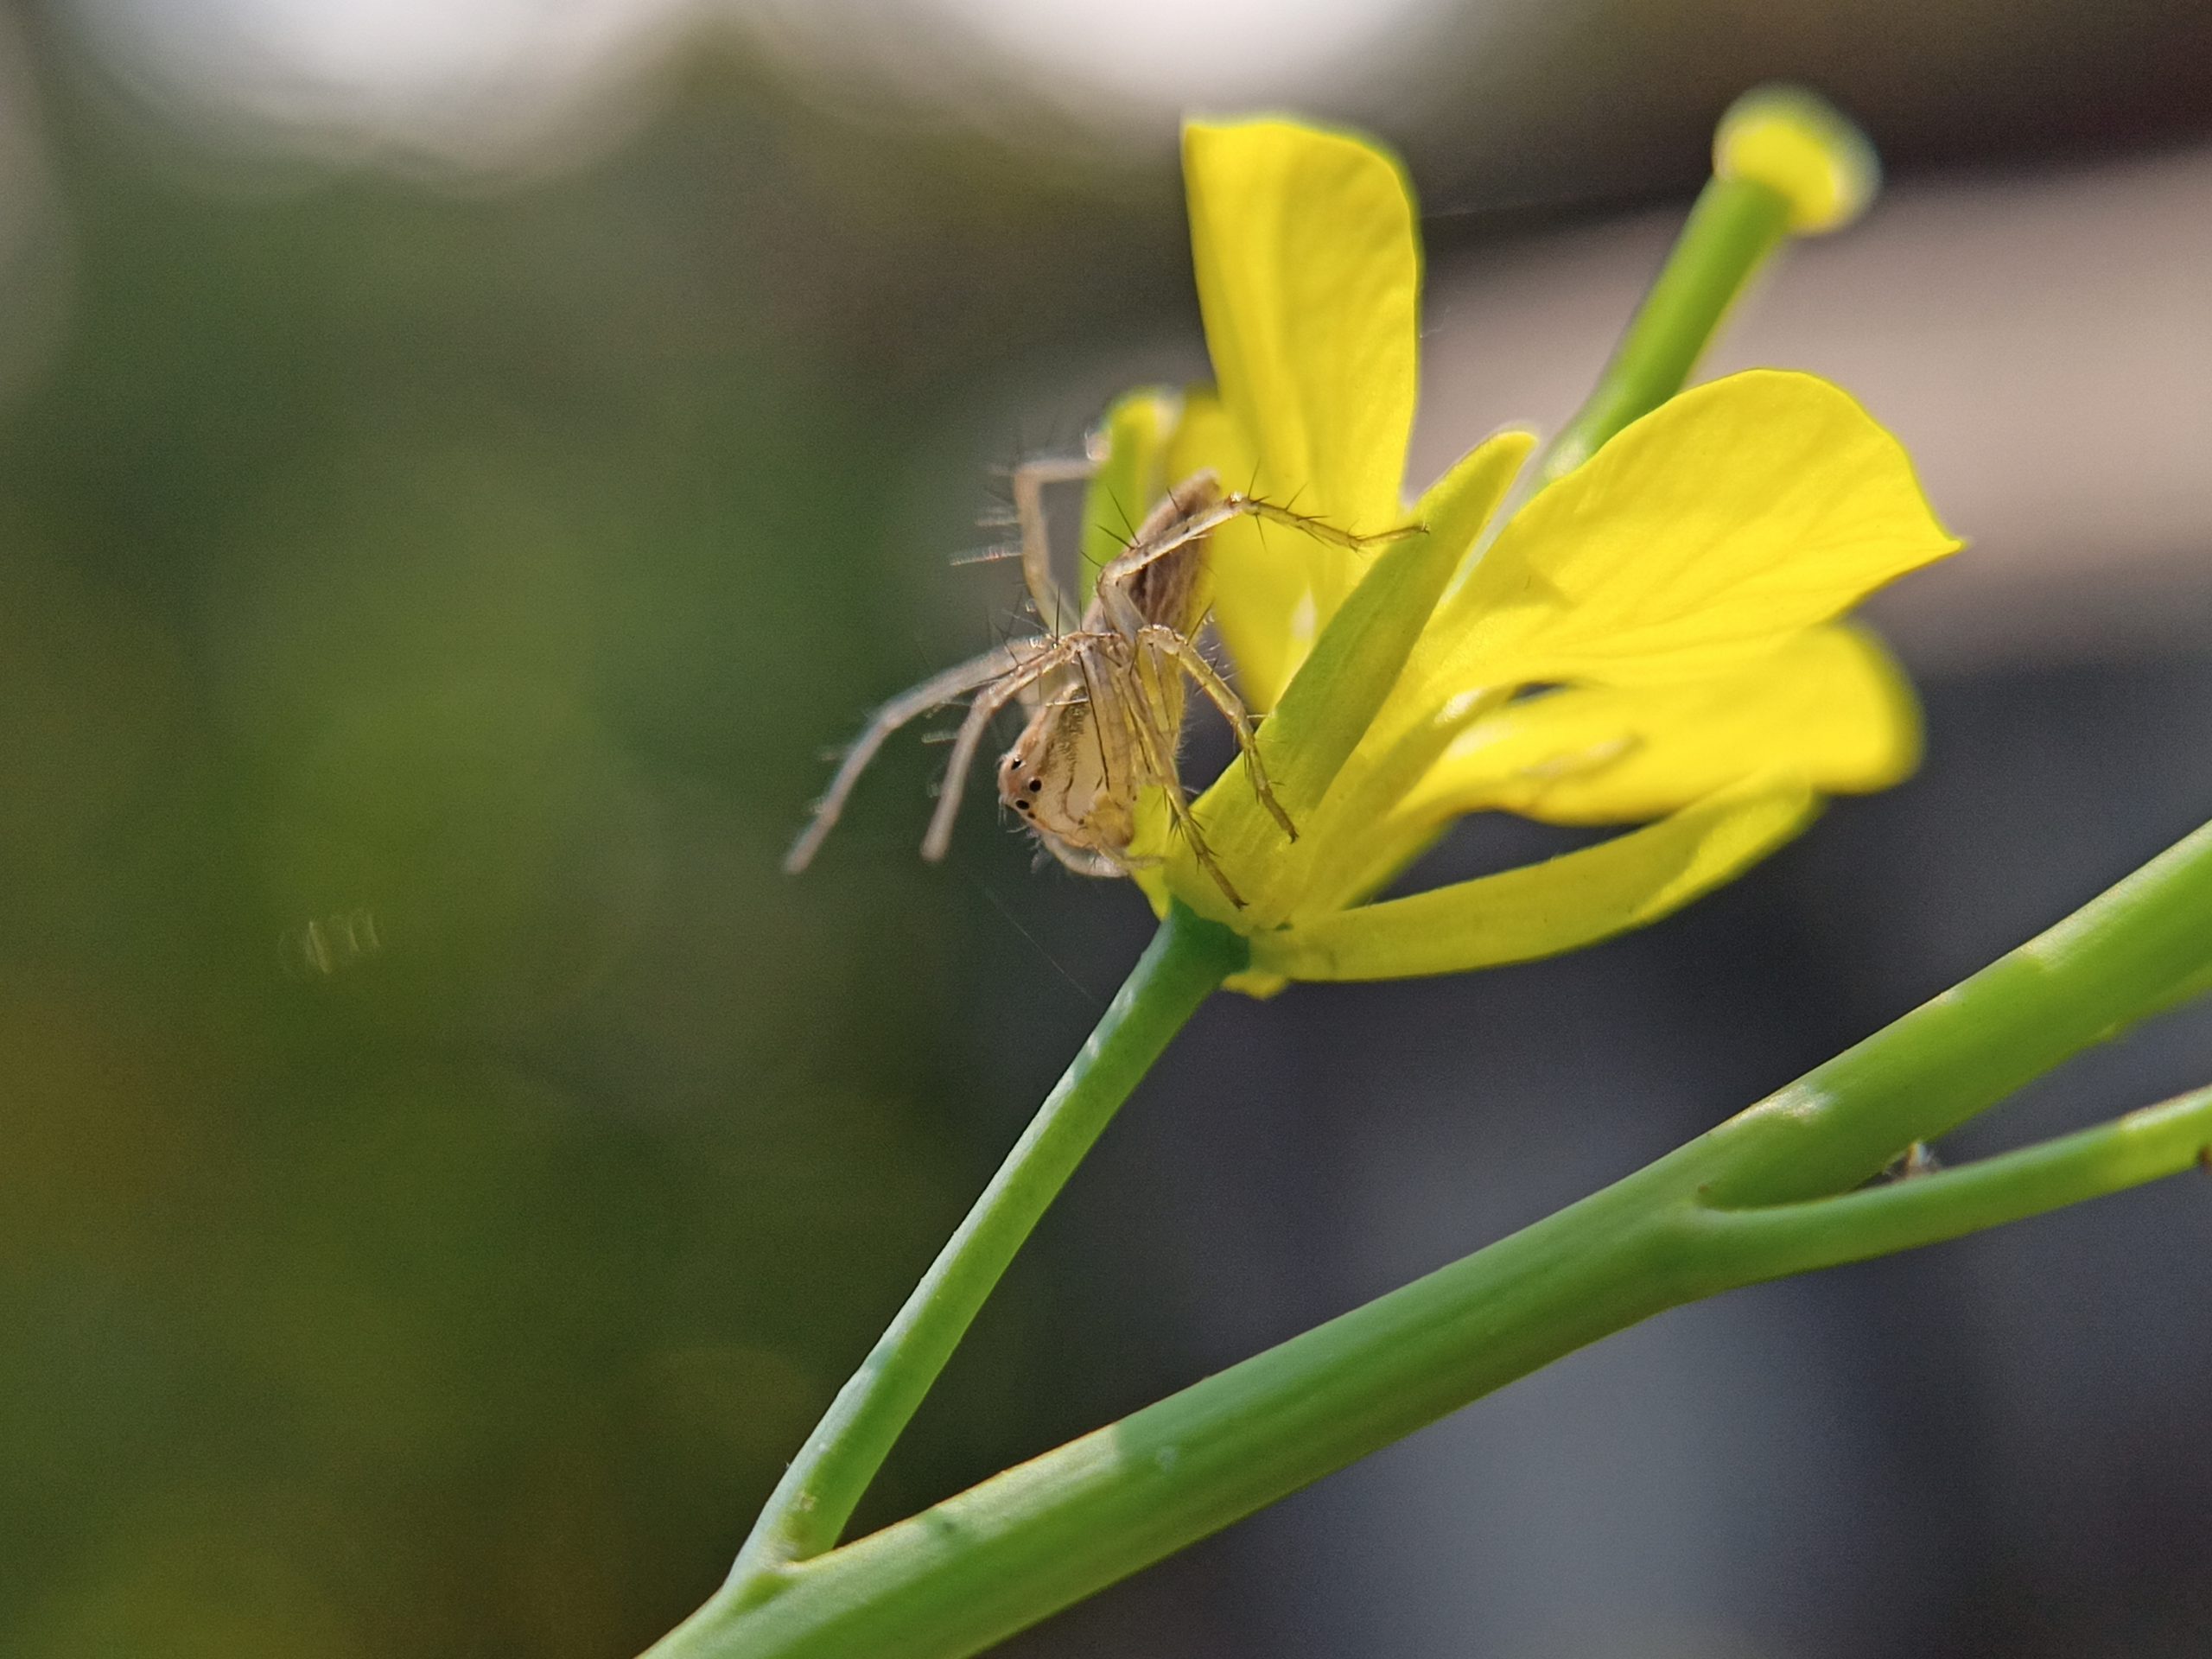 A spider on a flower